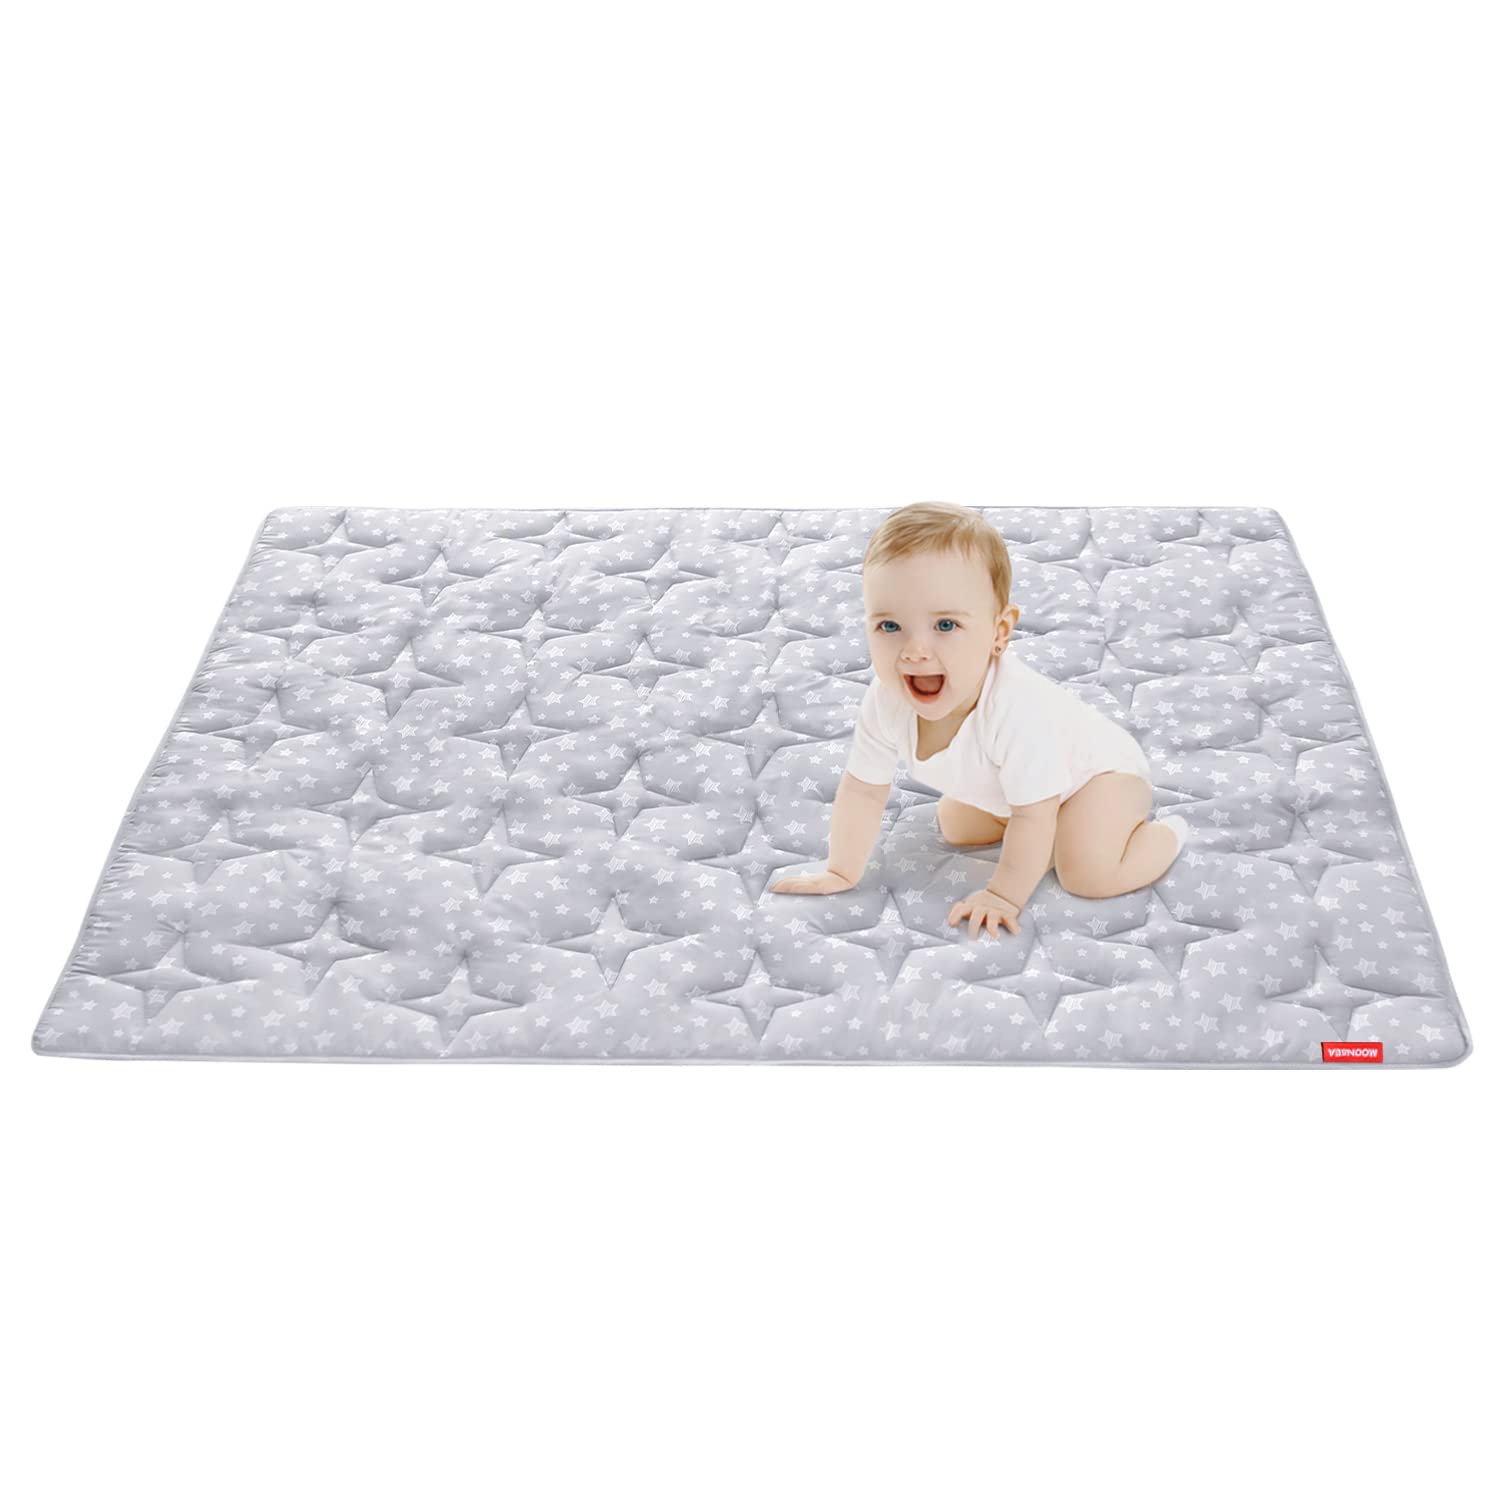 Baby Play Mat | Playpen Mat - 78.5 x 55, Large Padded Tummy Time Activity  Mat for Infant & Toddler, Grey Star